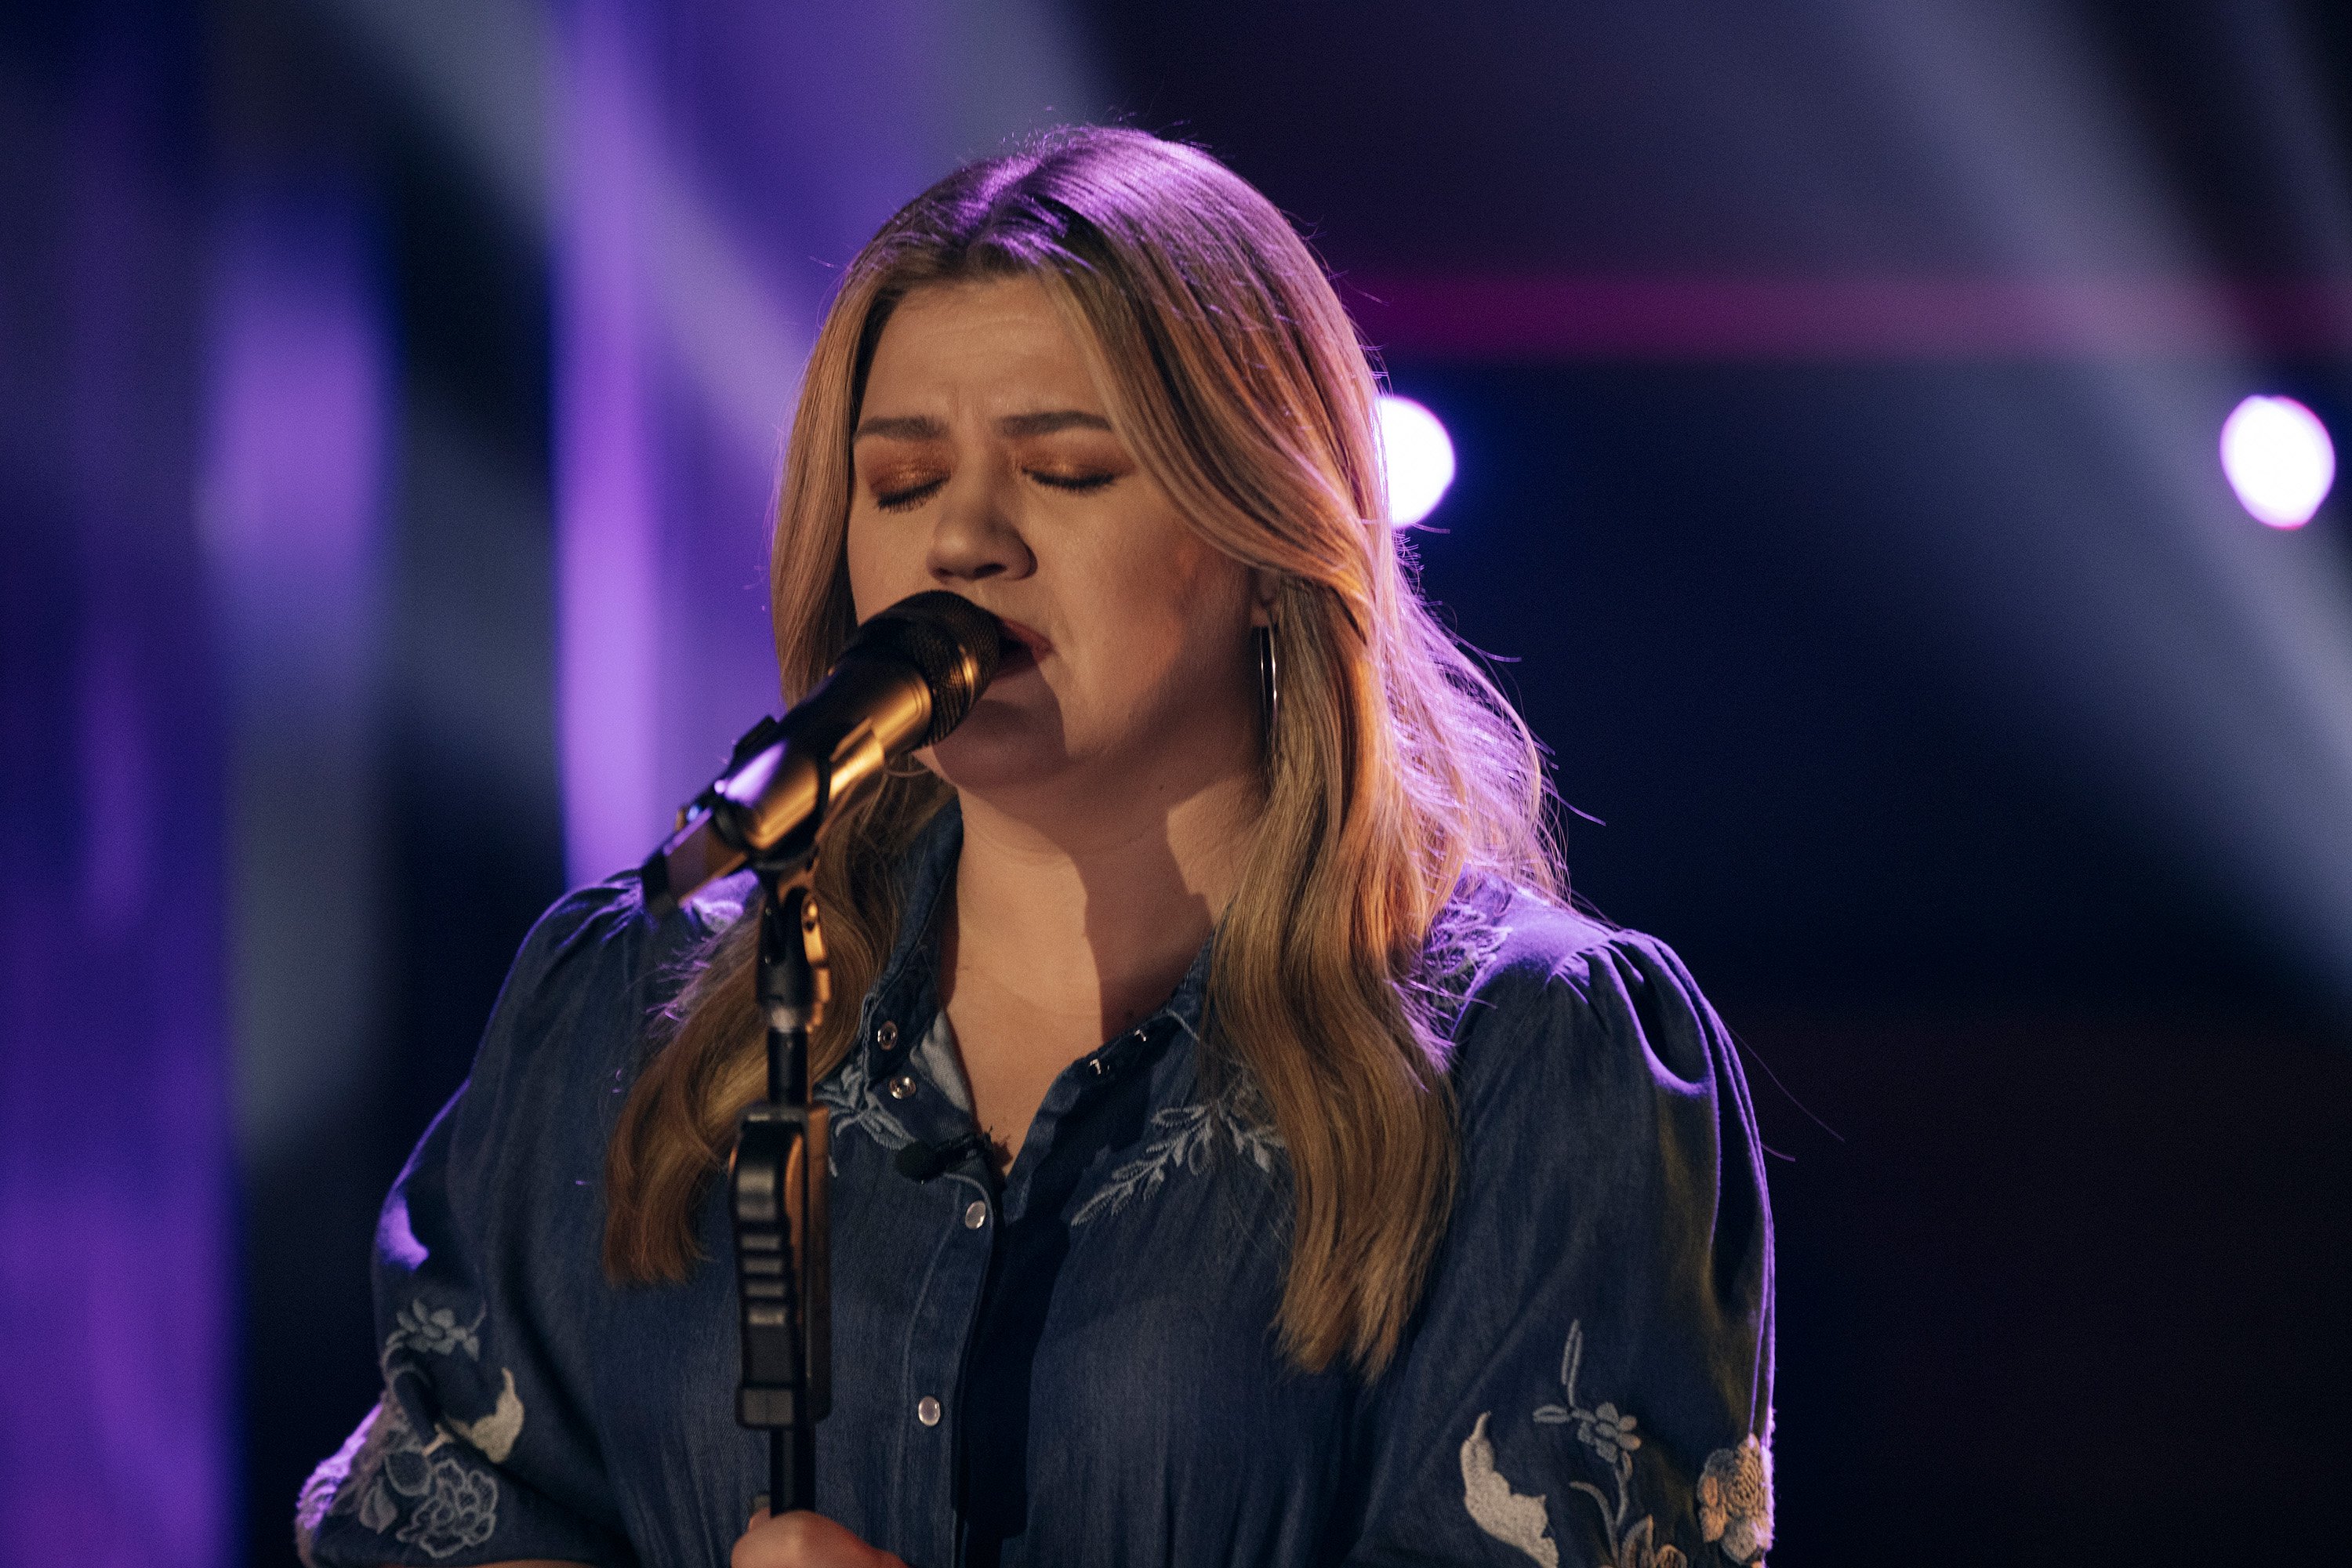   Kelly Clarkson onSeason 3 of "The Kelly Clarkson Show" on March 22, 2022. |  Source: Getty Images 